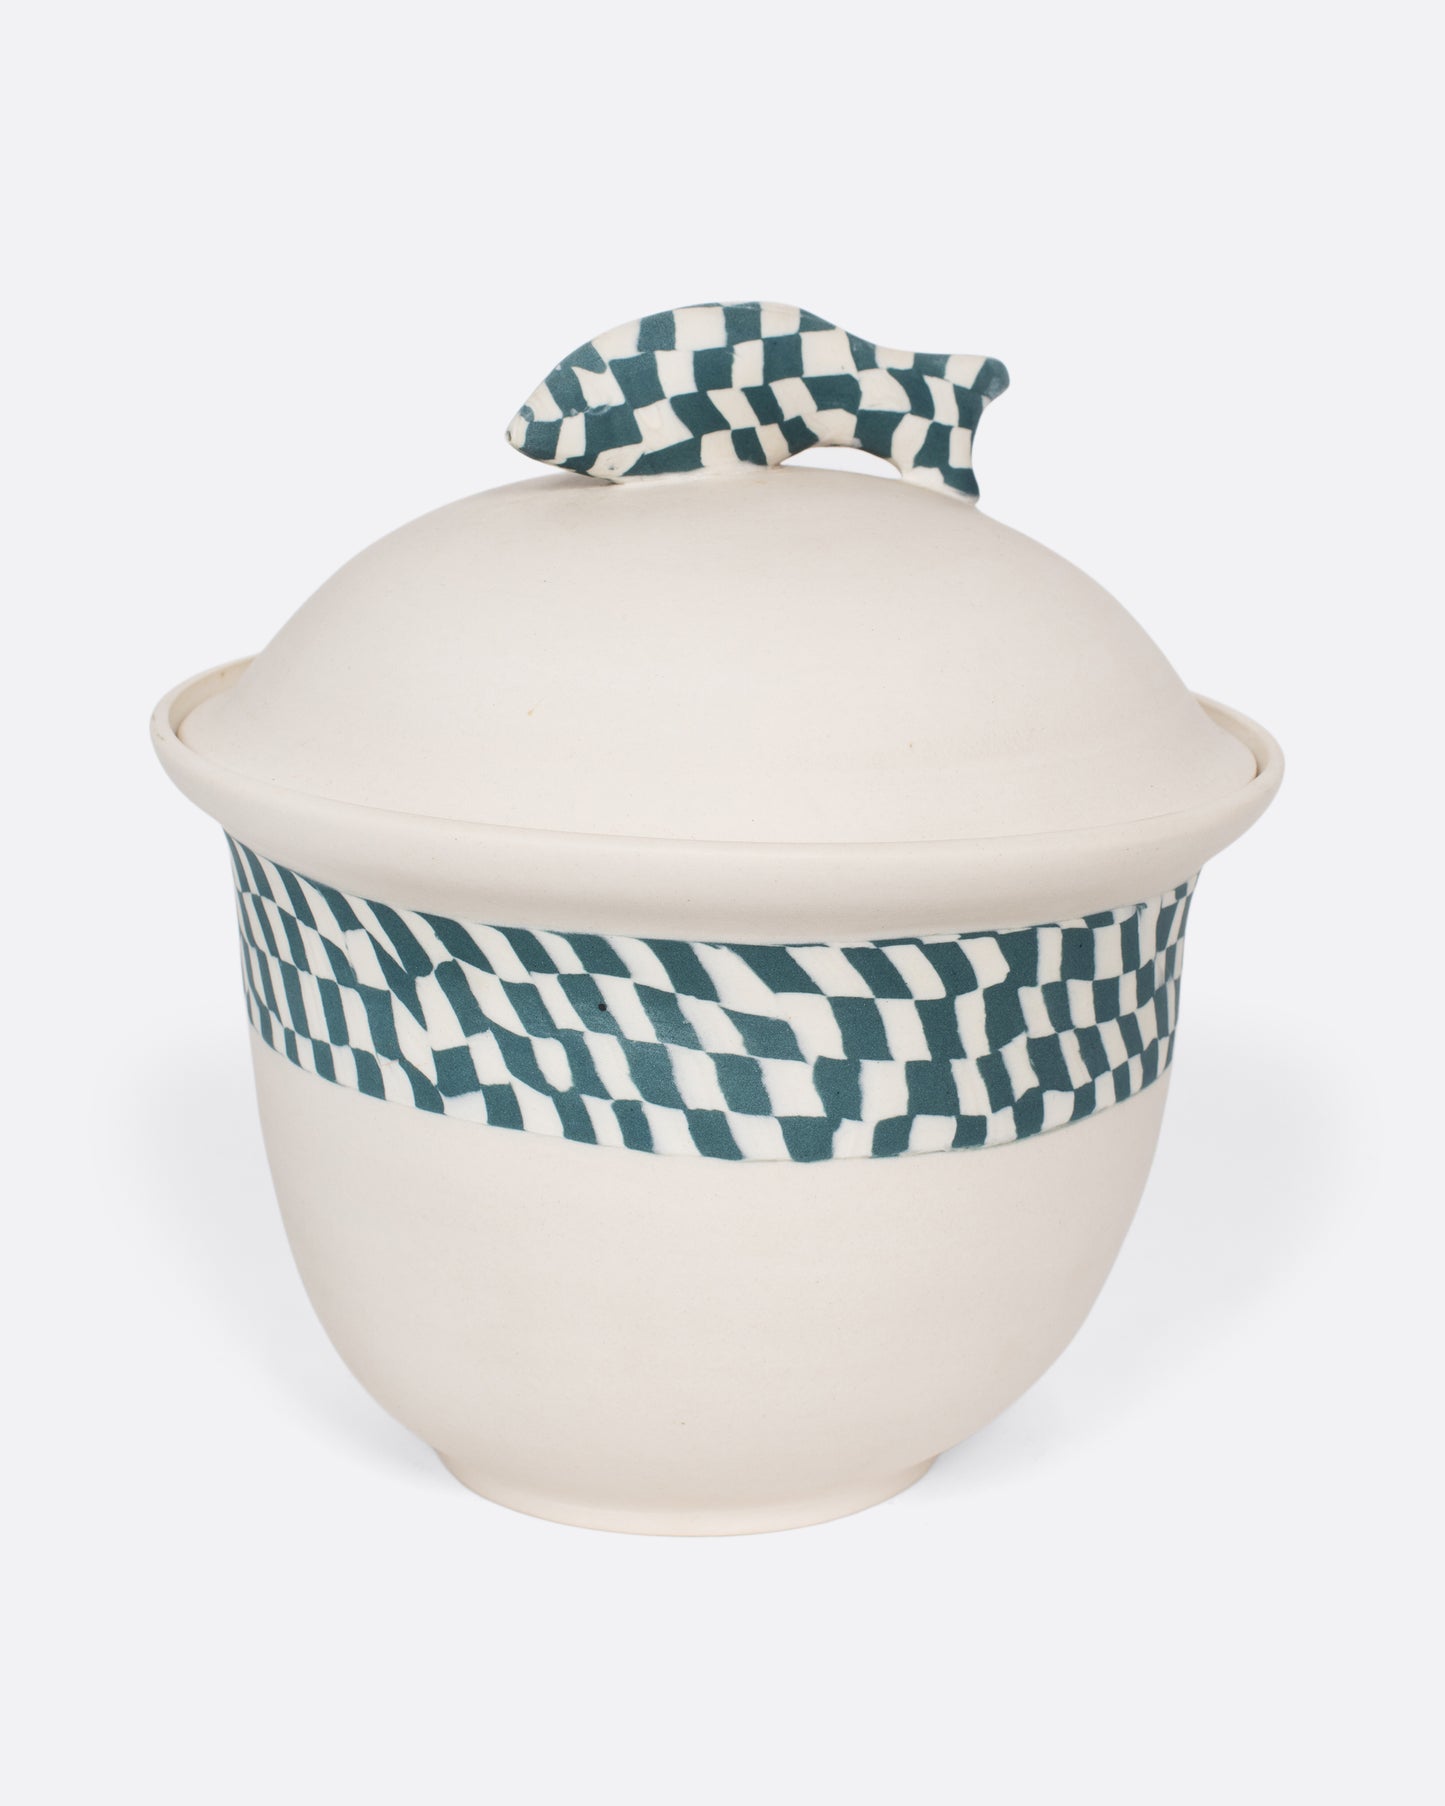  A vintage Nerikomi casserole dish with a blue and white checkered fish handle. The Japanese Nerikomi ceramic technique involves stacking and cutting colored pieces of clay, creating this beautiful checkered effect.